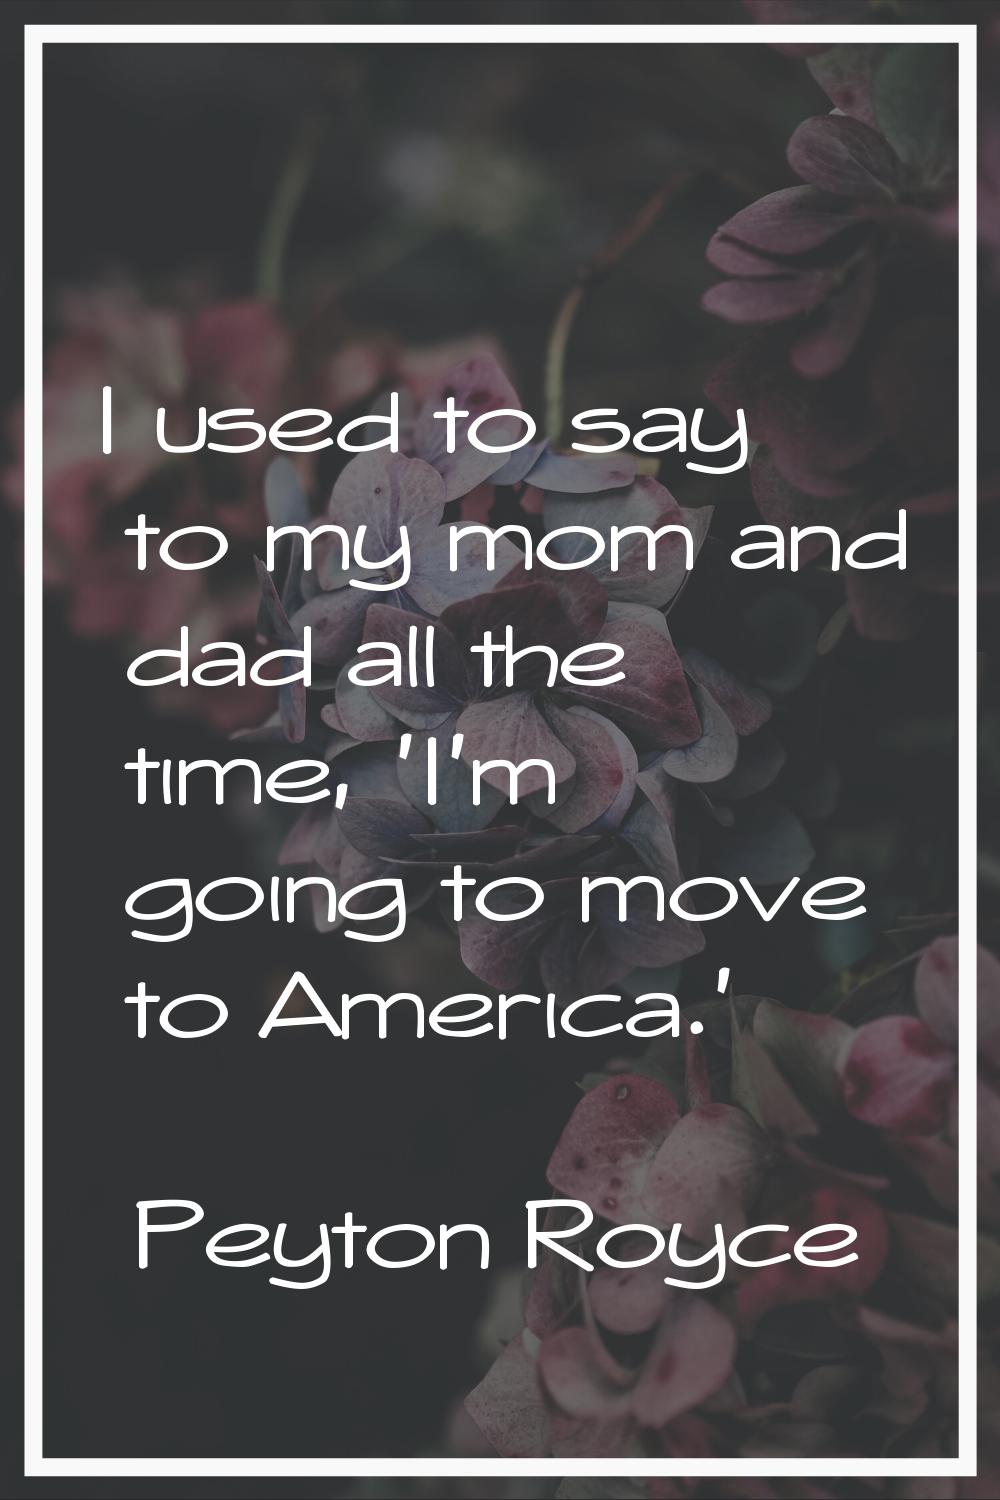 I used to say to my mom and dad all the time, 'I'm going to move to America.'